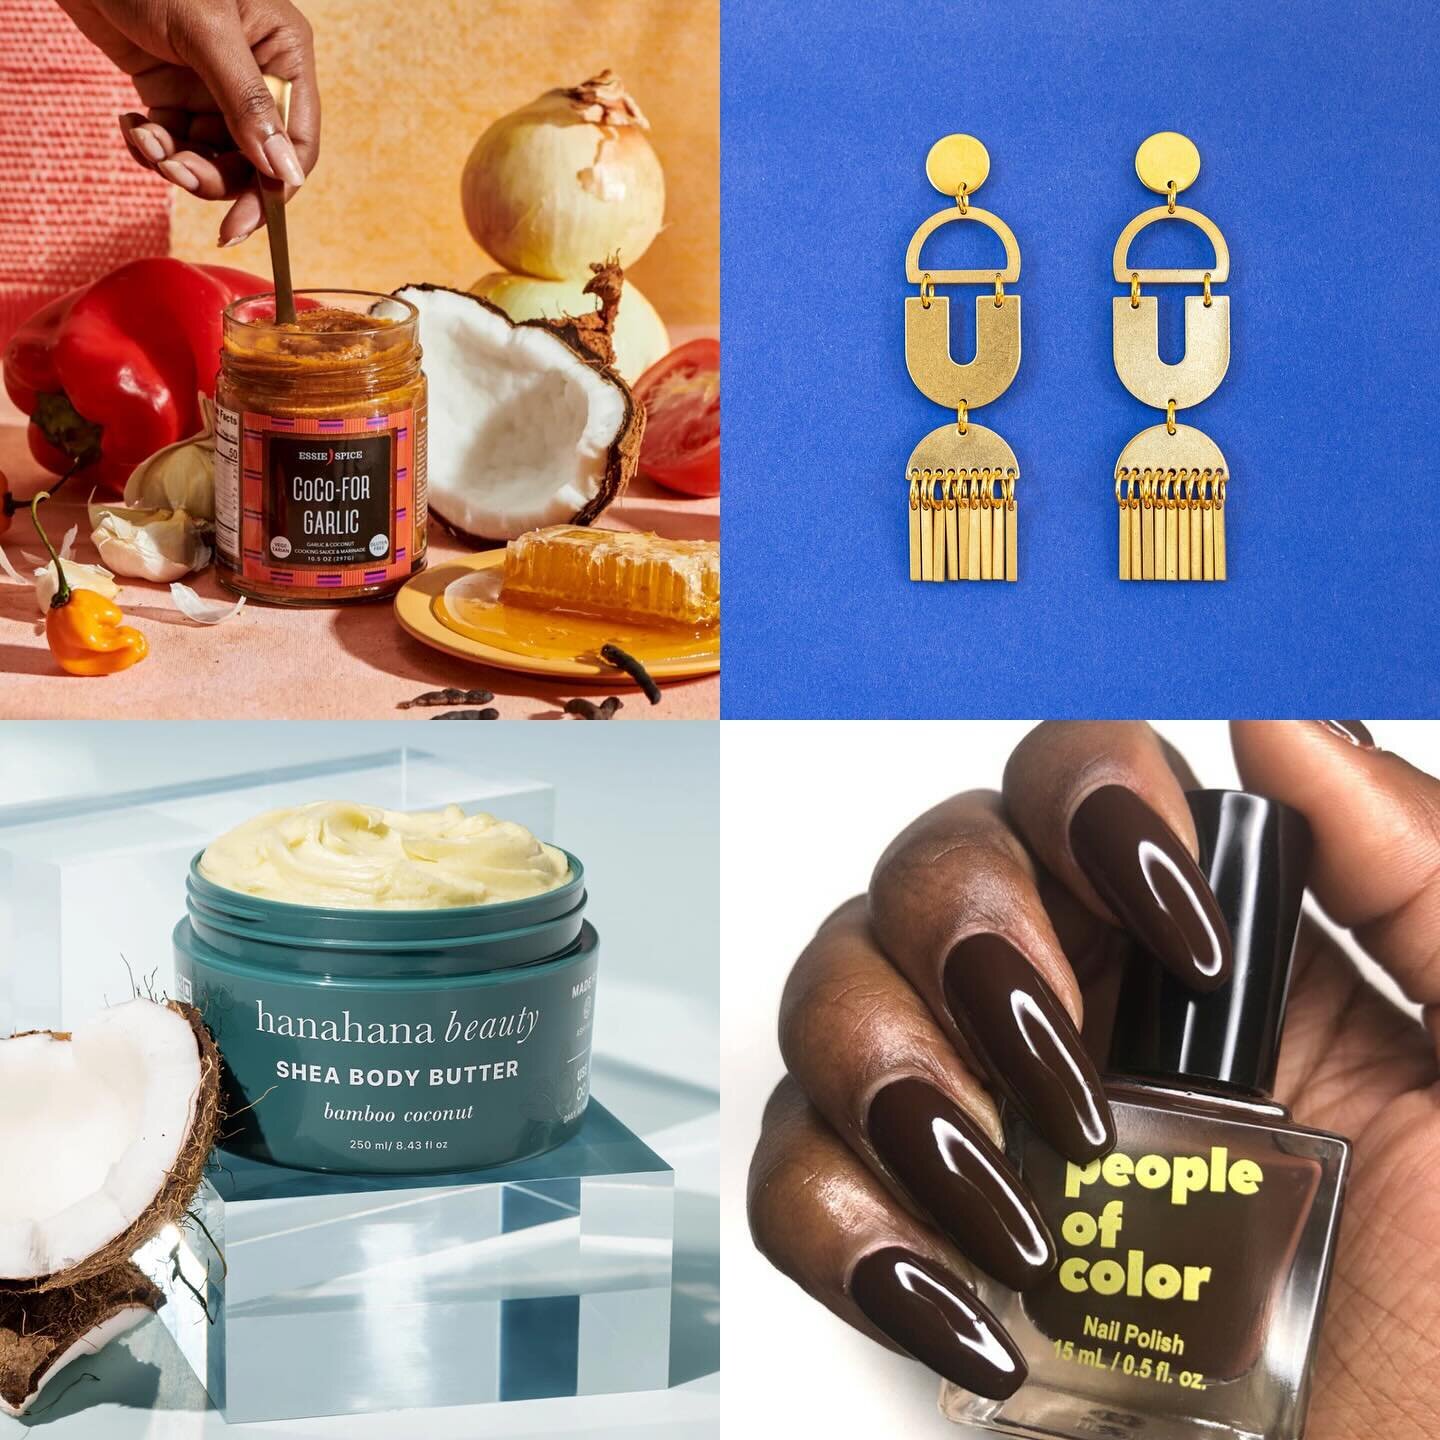 We have compiled our favorite black owned, women owned brands and creatives. Some we know personally, some we want to know, and we want YOU to get to know and love them all&hellip;
Jewelry, art, beauty, and food this group of bad ass ladies got you c